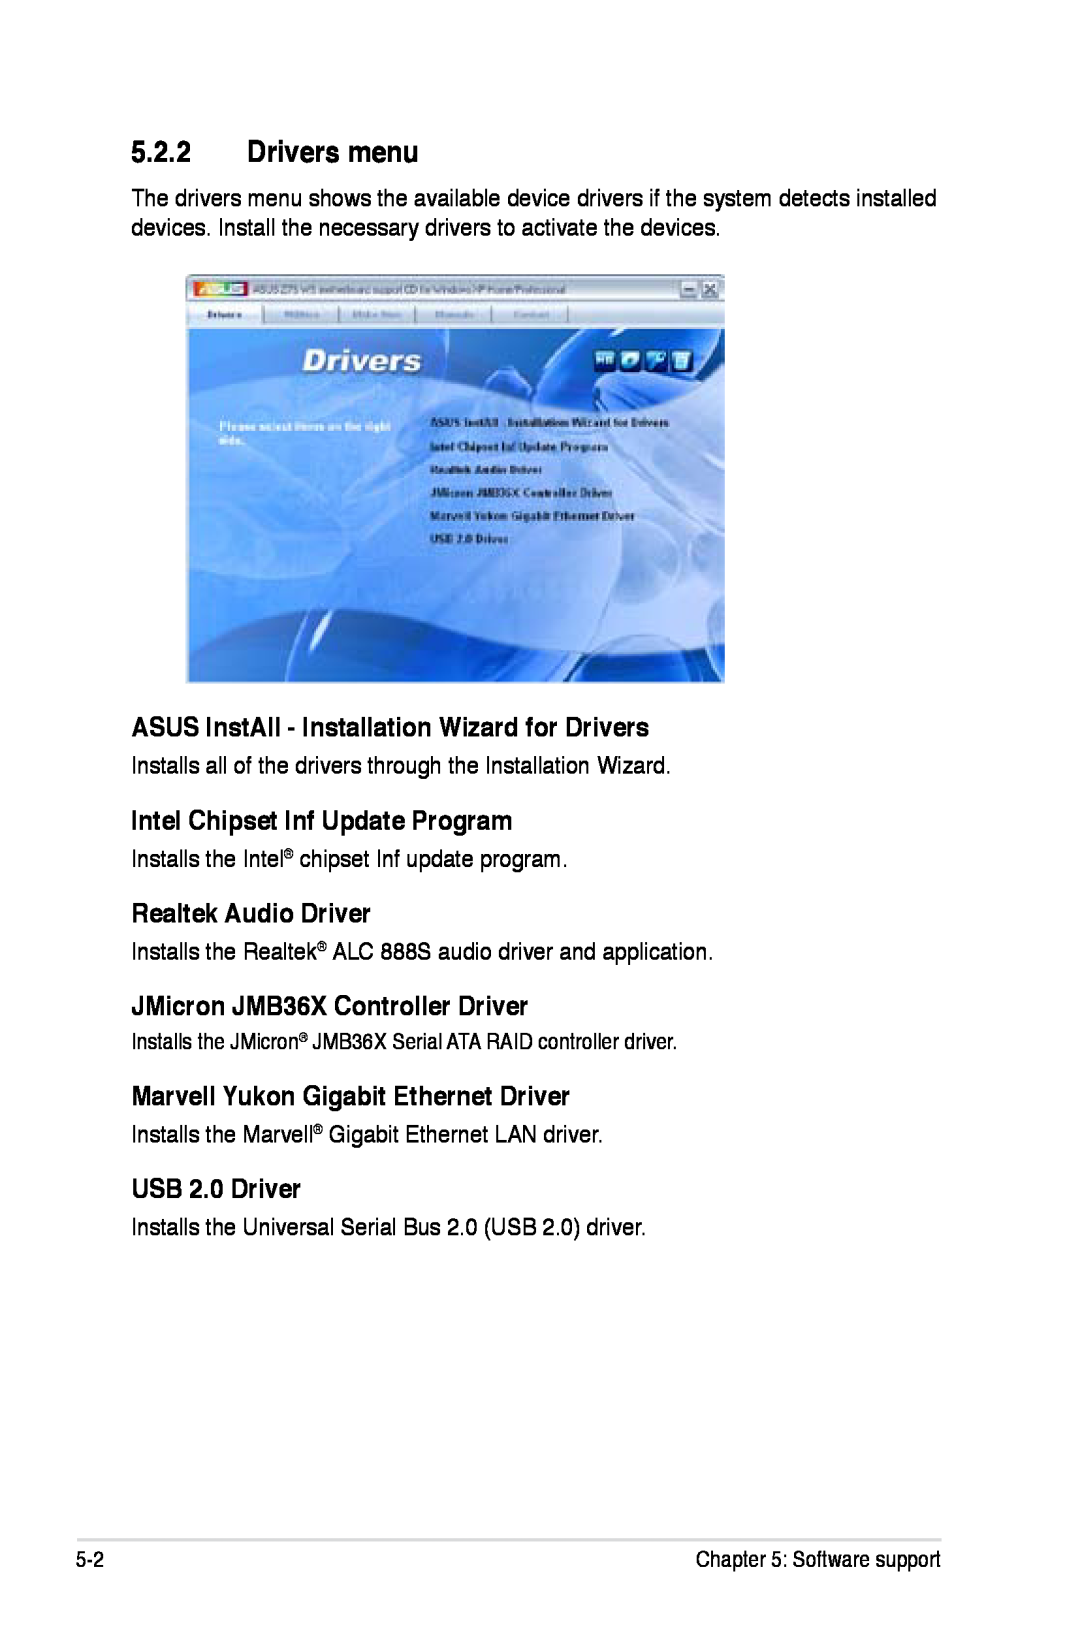 Asus Z7S WS Drivers menu, ASUS InstAll - Installation Wizard for Drivers, Intel Chipset Inf Update Program, USB 2.0 Driver 